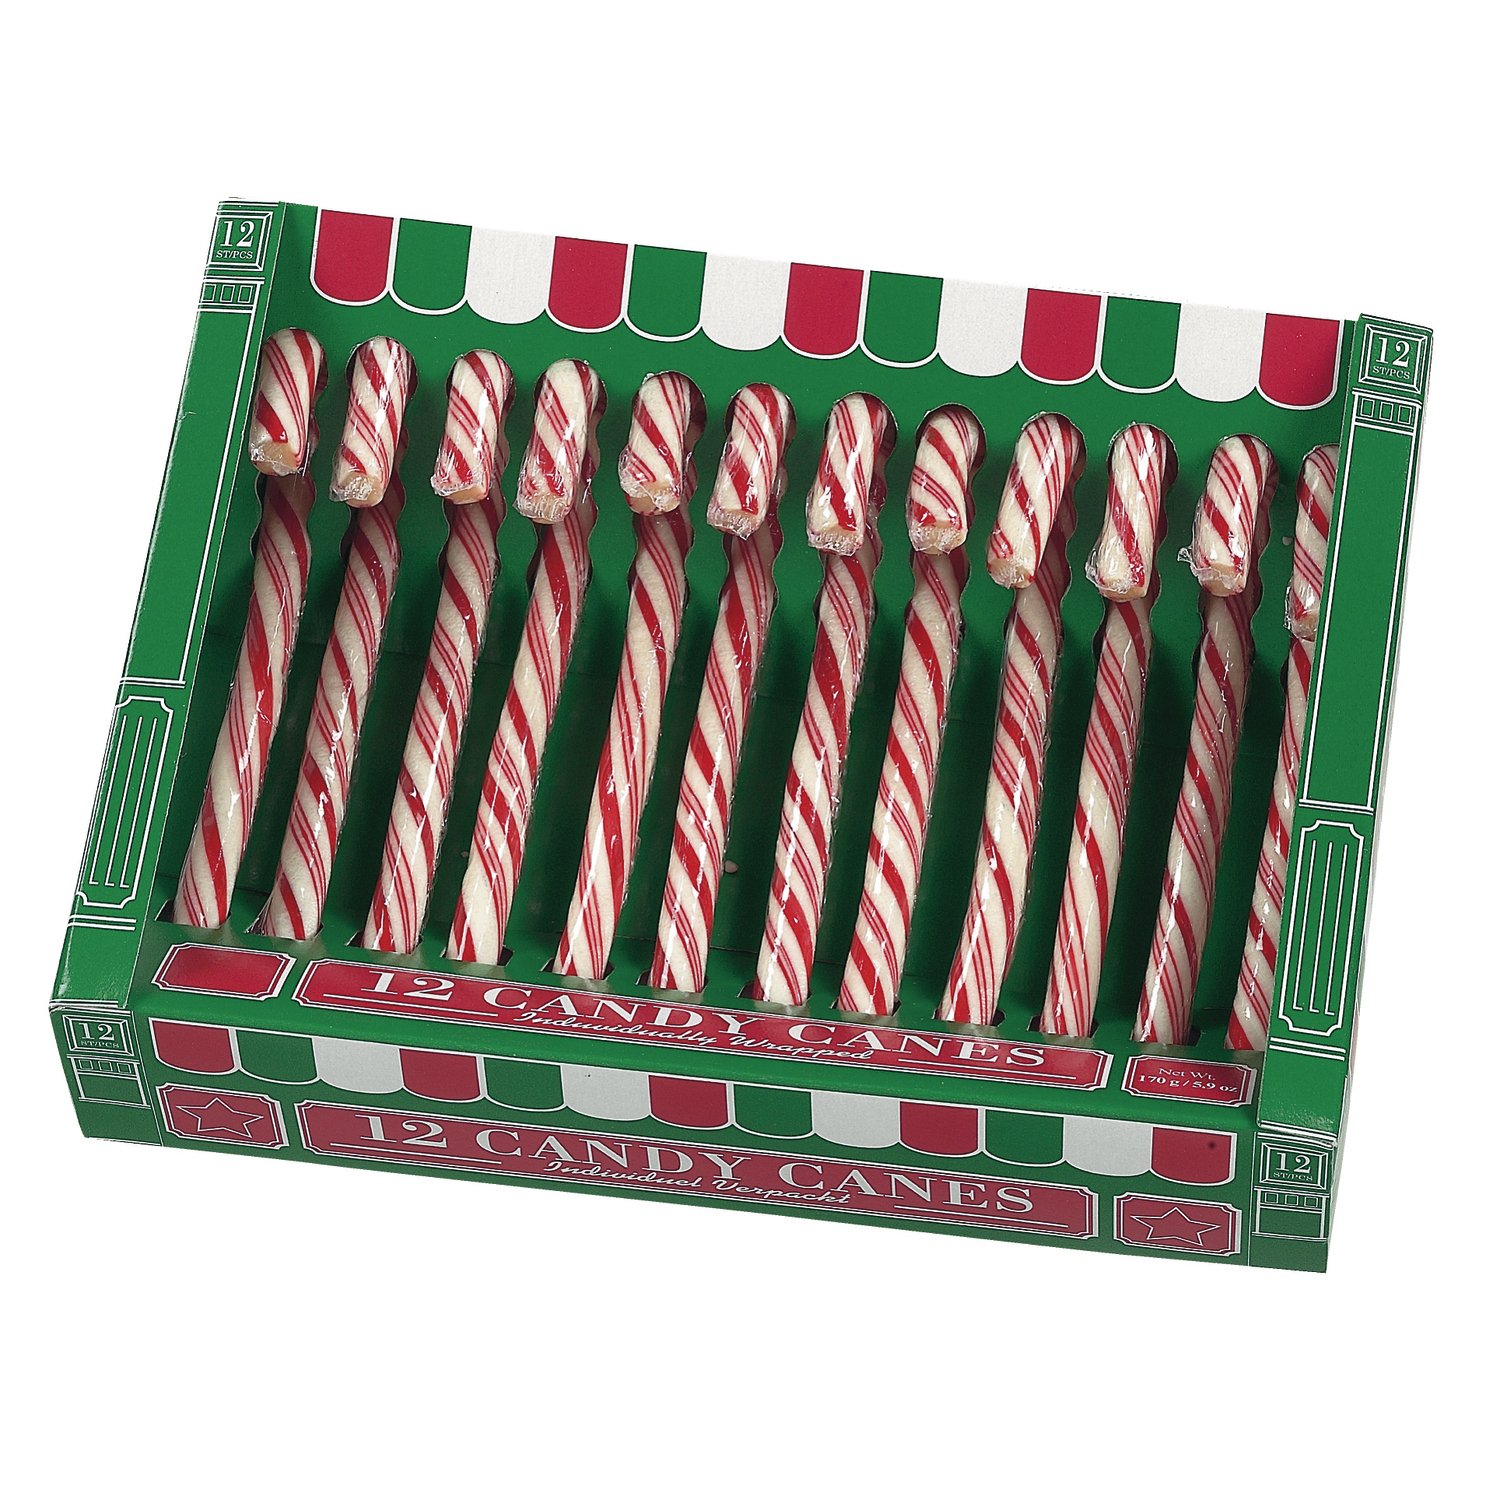 Green box of 12 red and white candy canes (12.8cm) - 24x170g